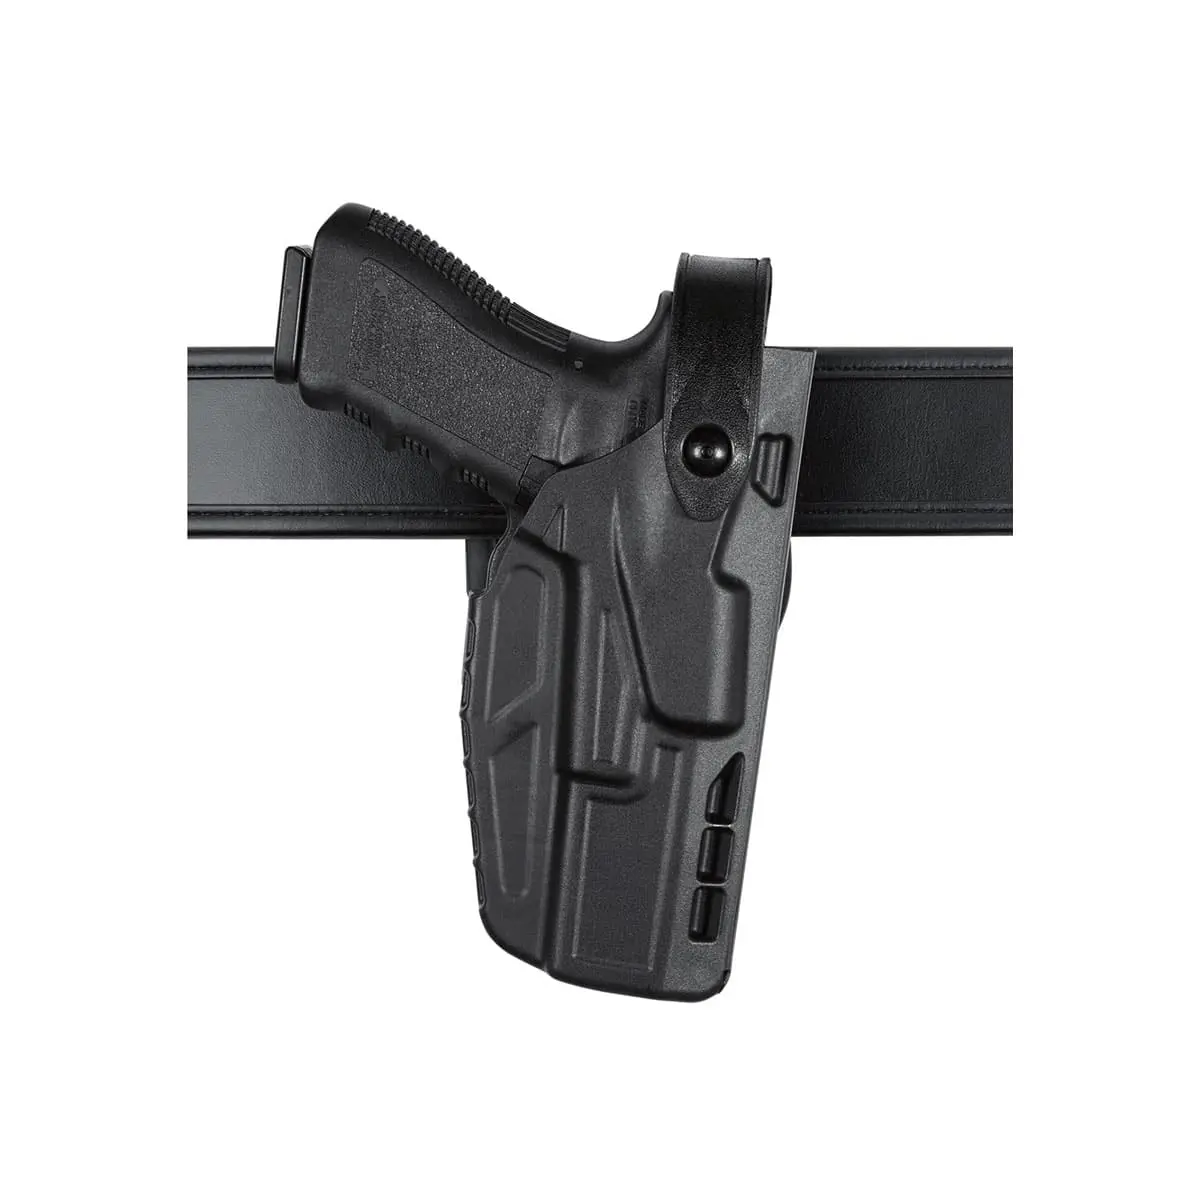 7280 7ts sls mid ride level iii retention duty holster with sentry no hood guard 4